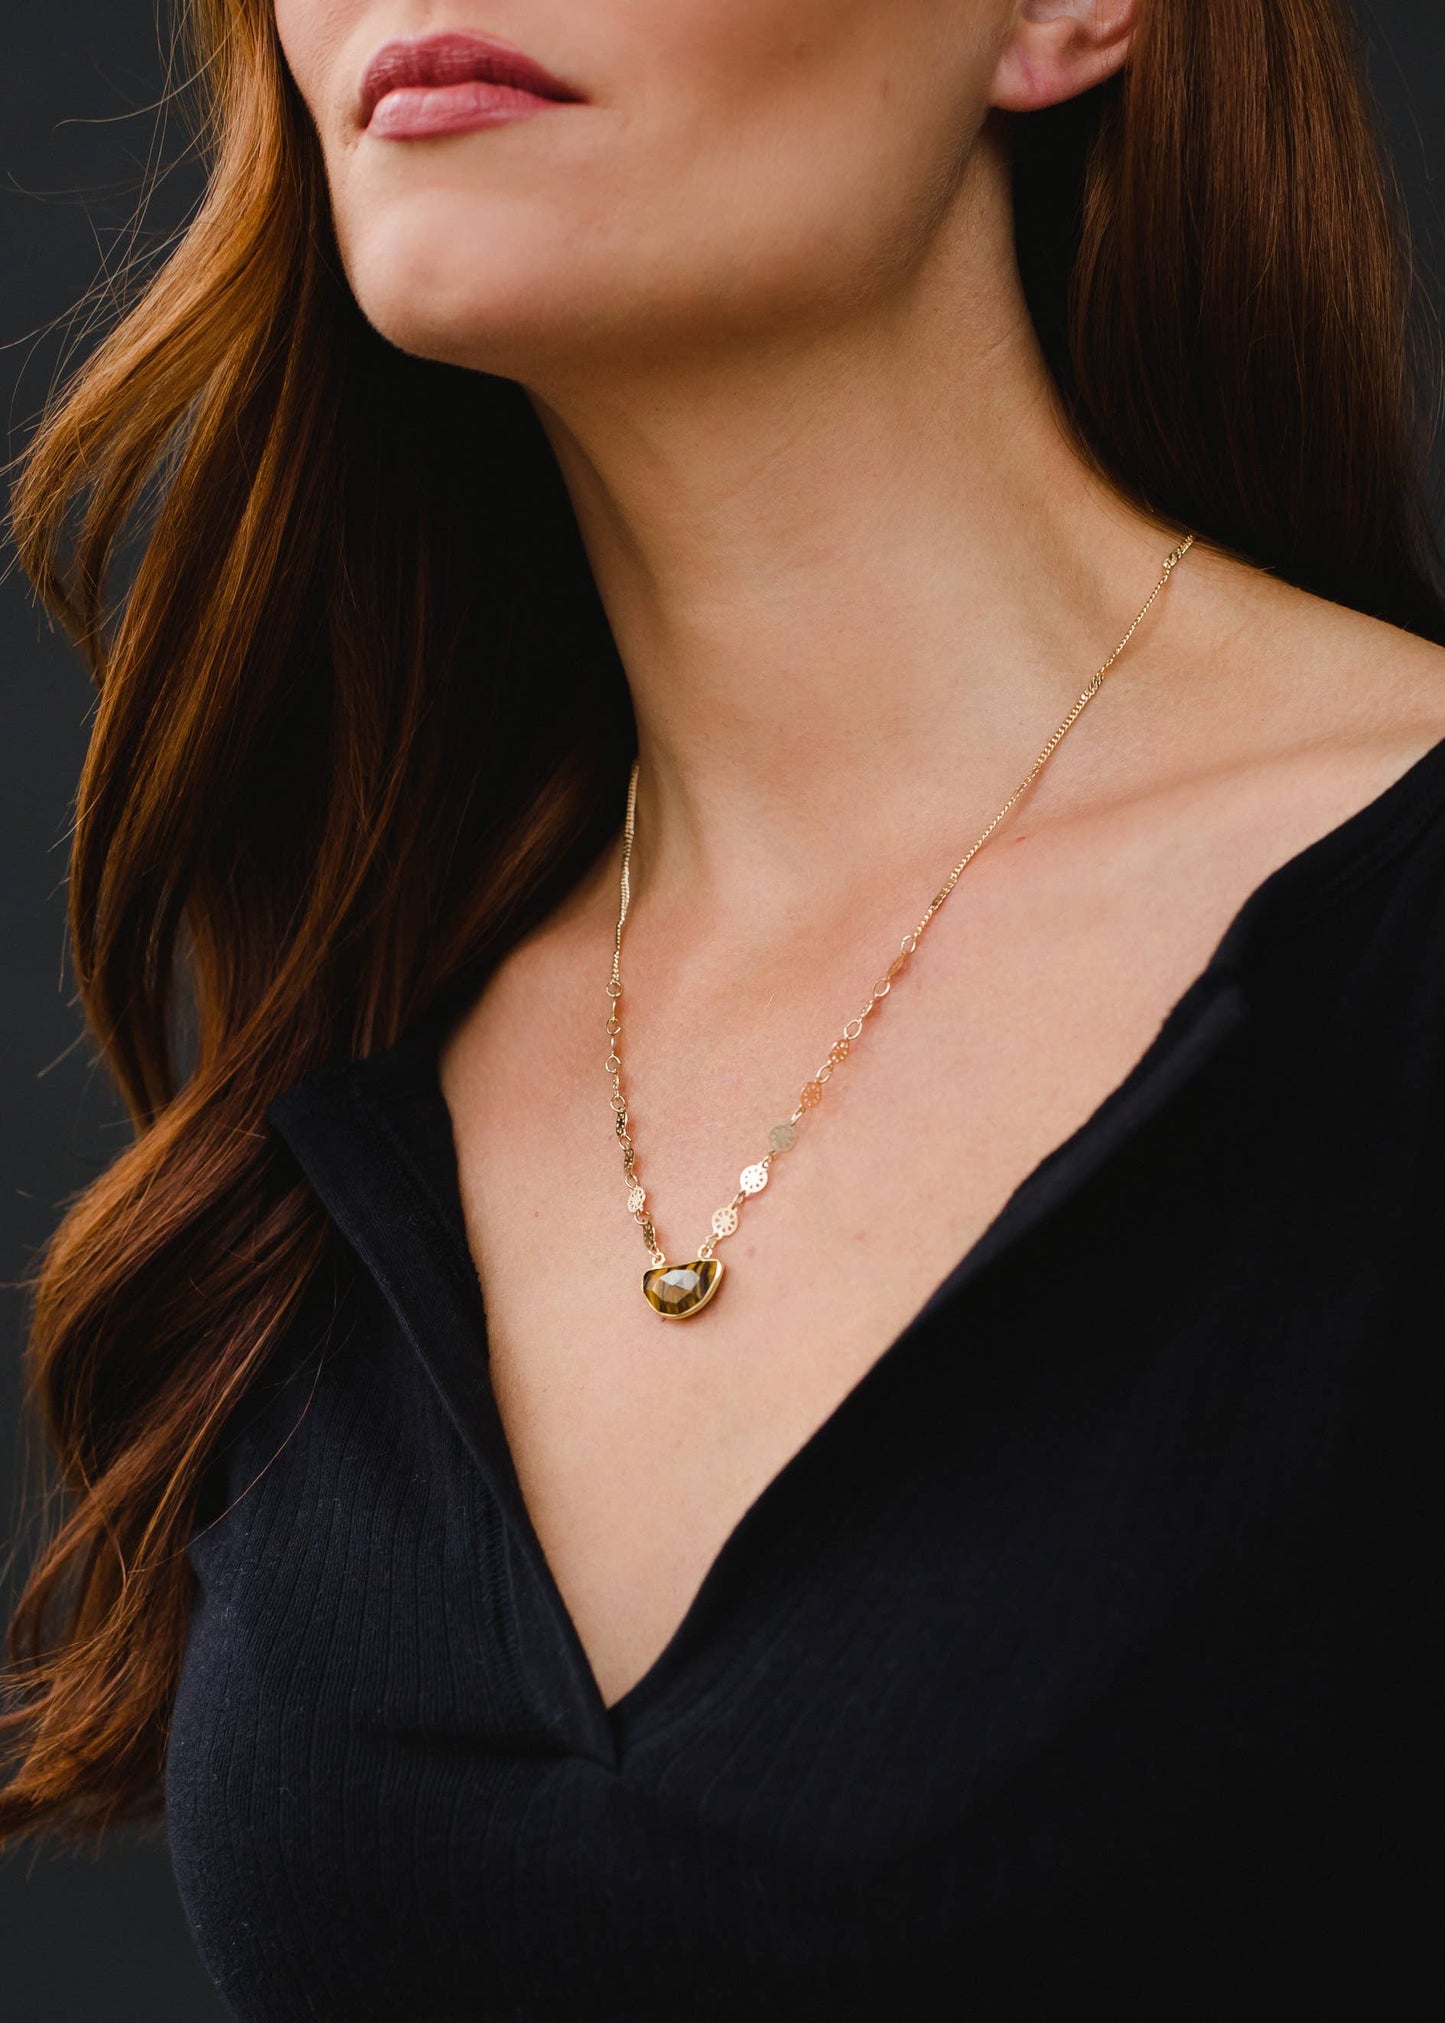 Gold Necklace with Brown Stone Pendant Fall-Winter Panache Apparel Co.